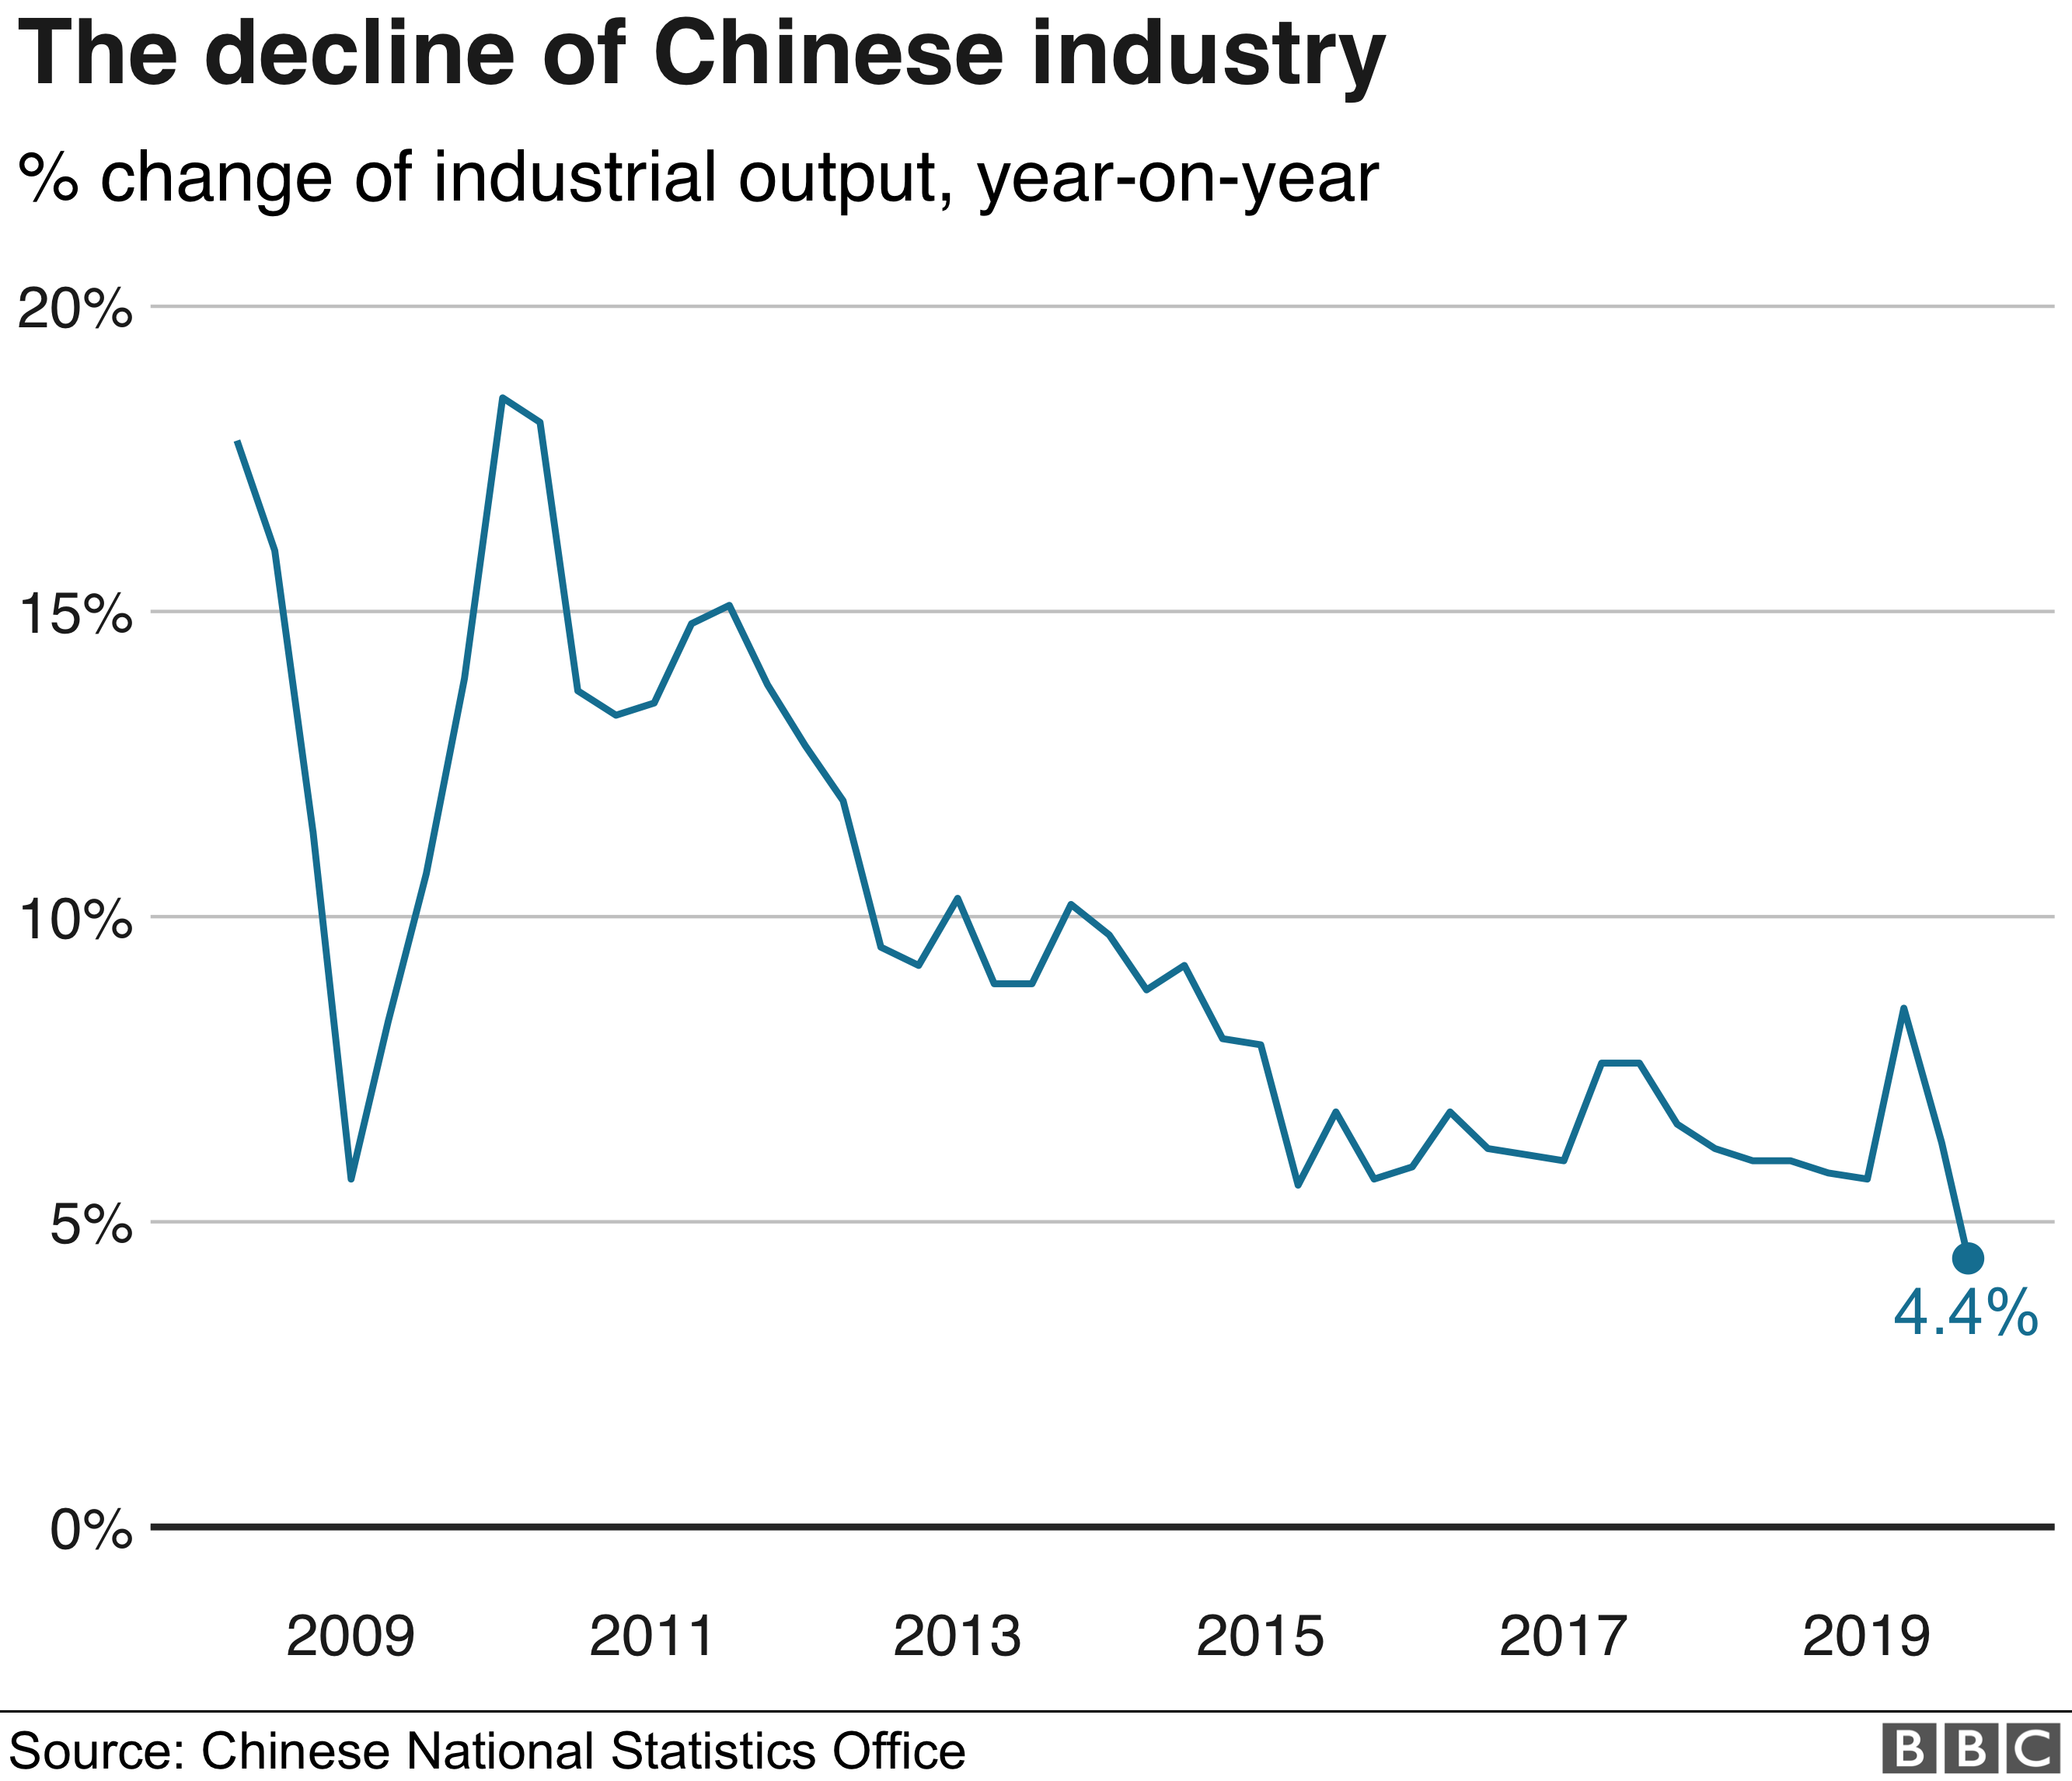 The decline of Chinese industry